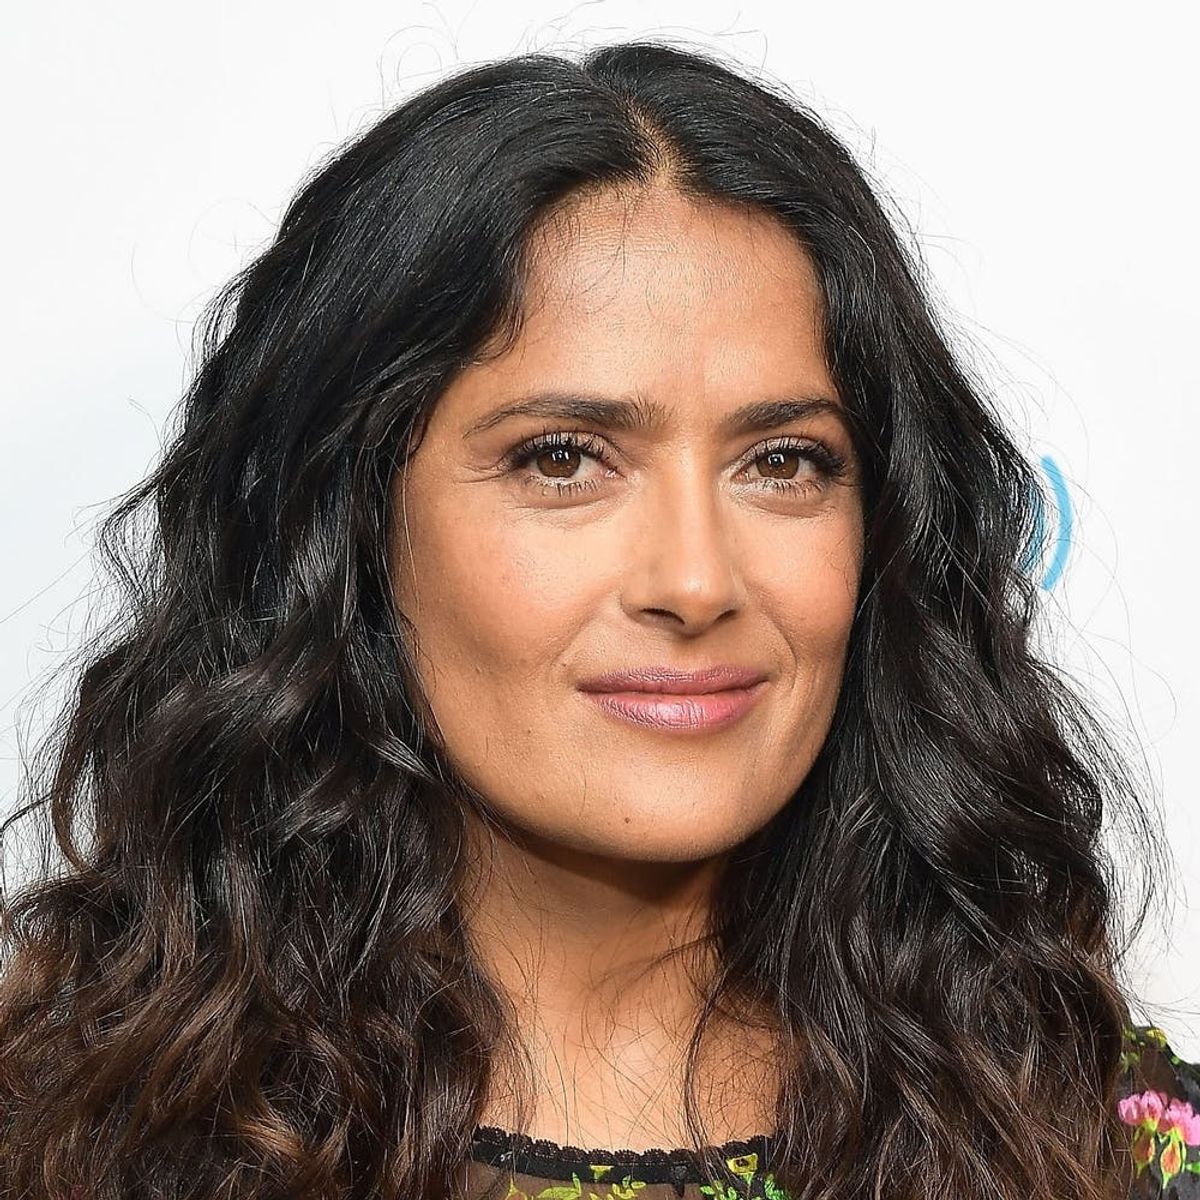 Salma Hayek Pinault Is Nearly Unrecognizable As a Blonde